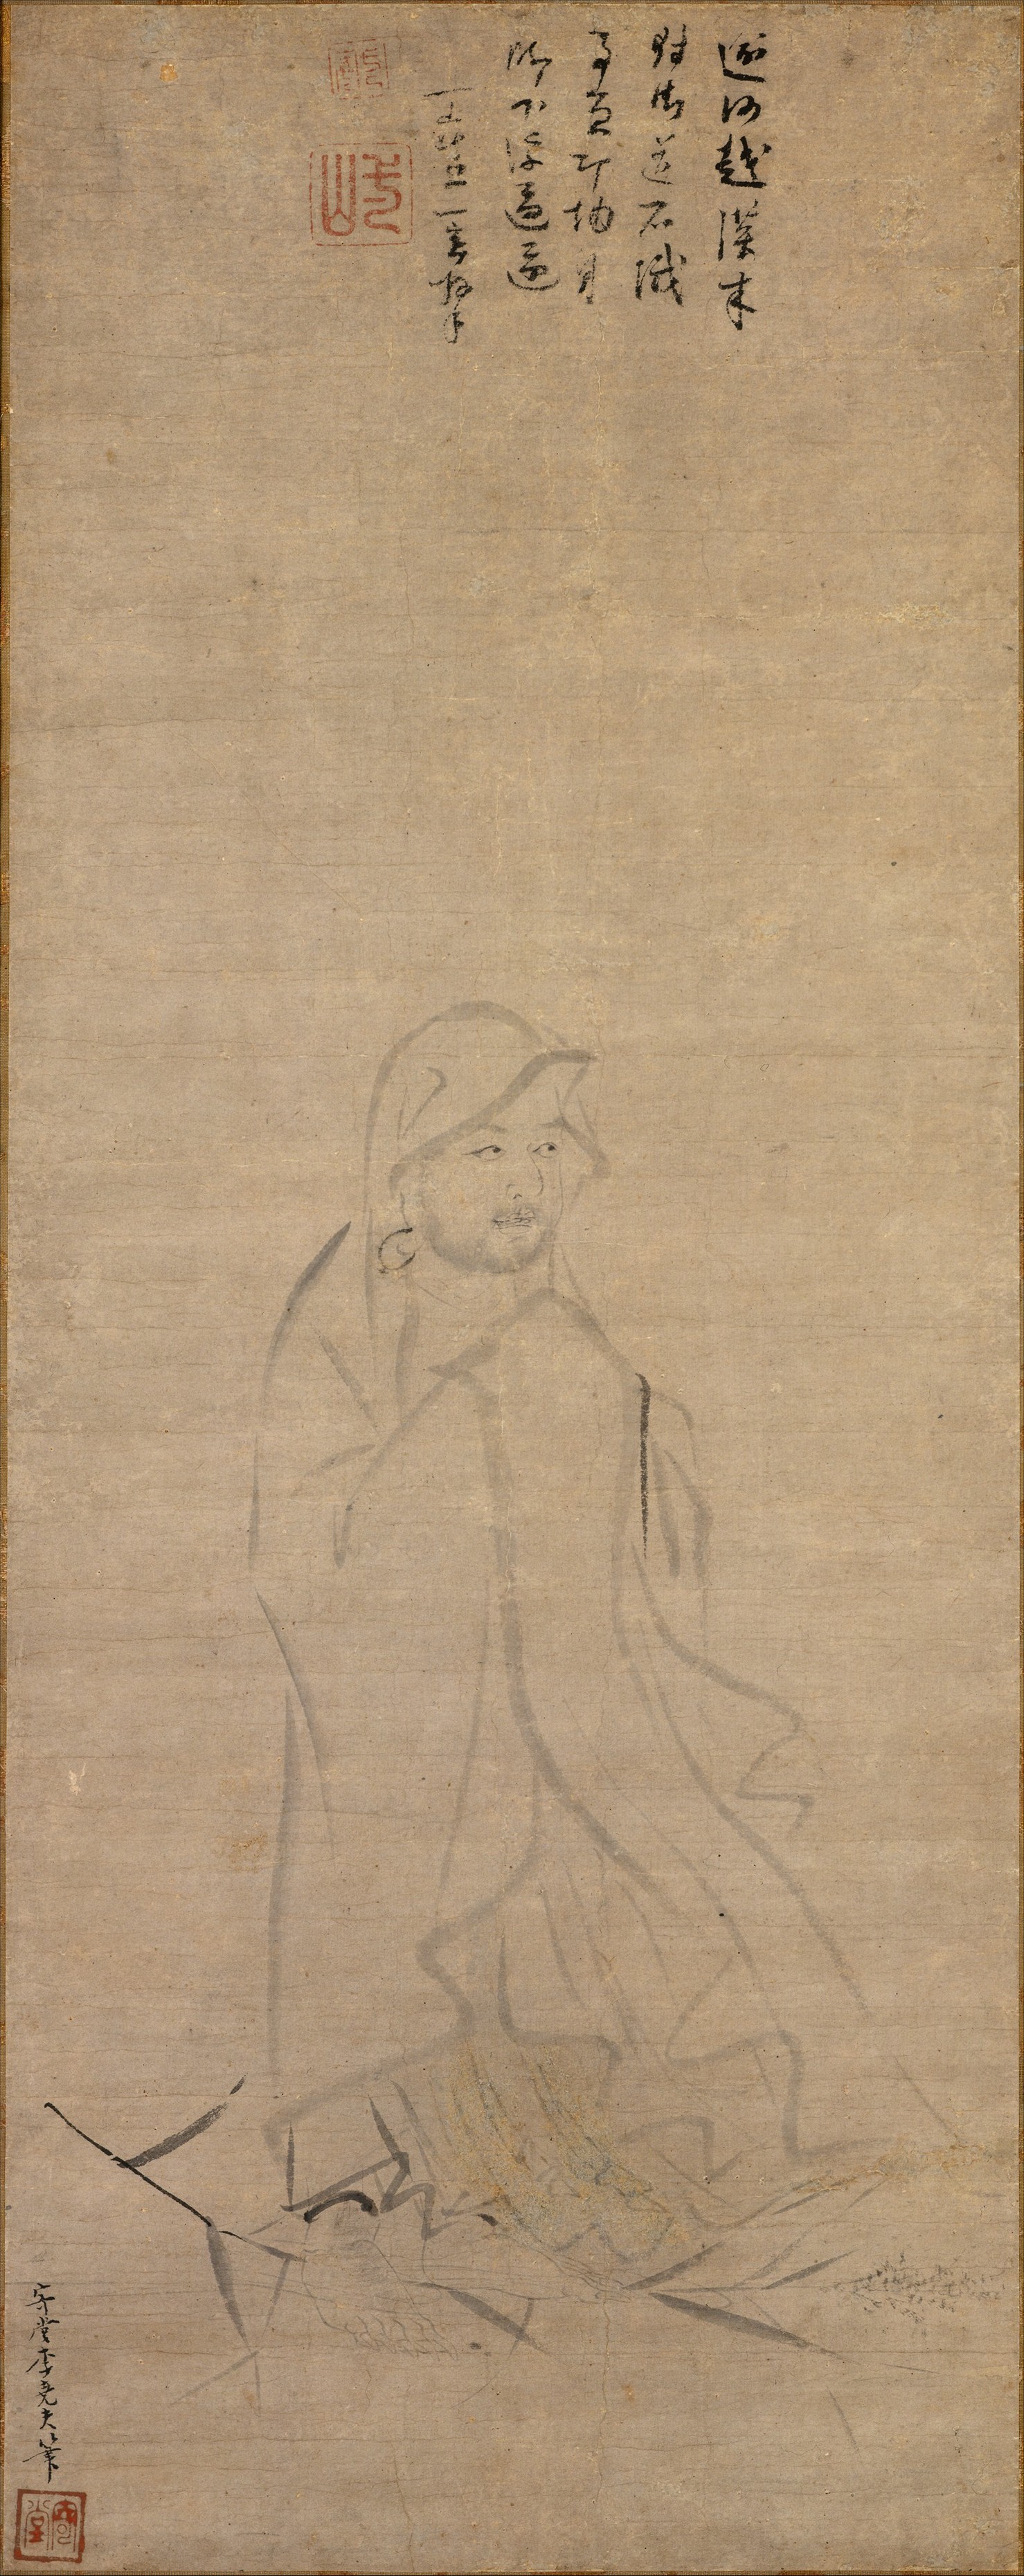 Bodhidharma crossing the Yangtze river on a reed